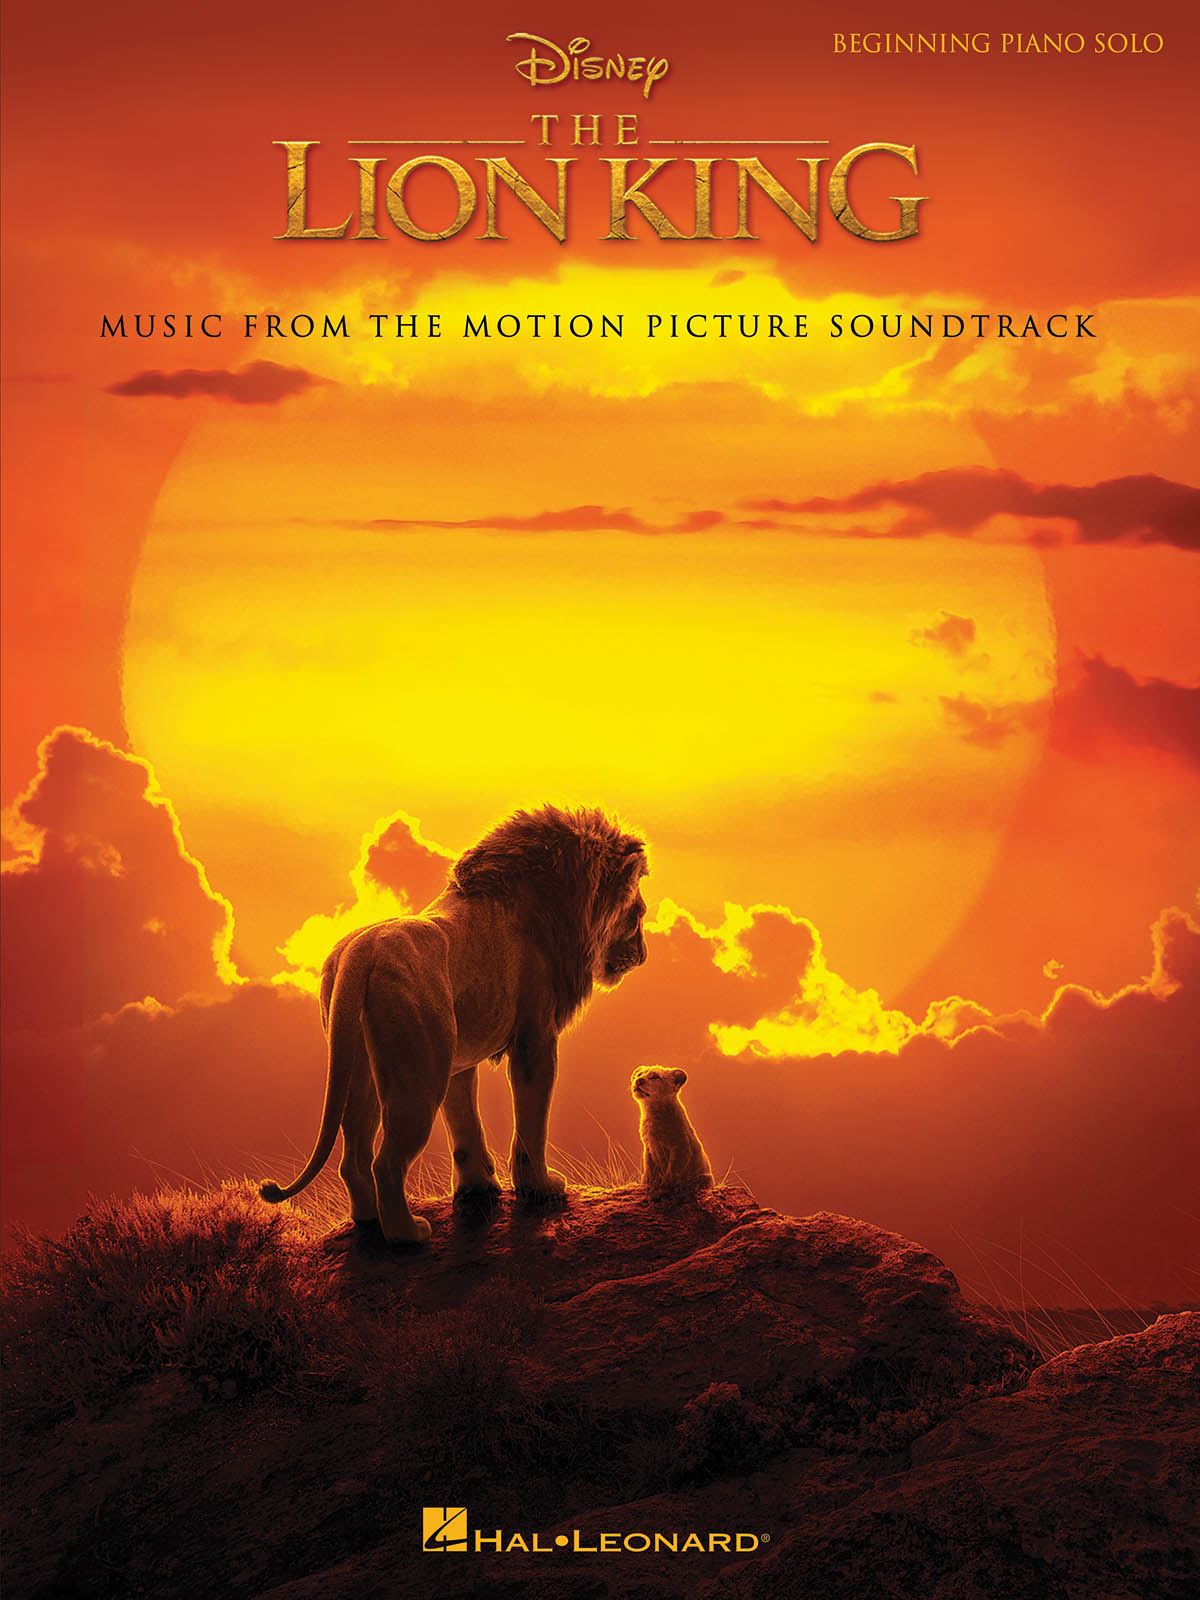 The Lion King - Beginning Piano Solo